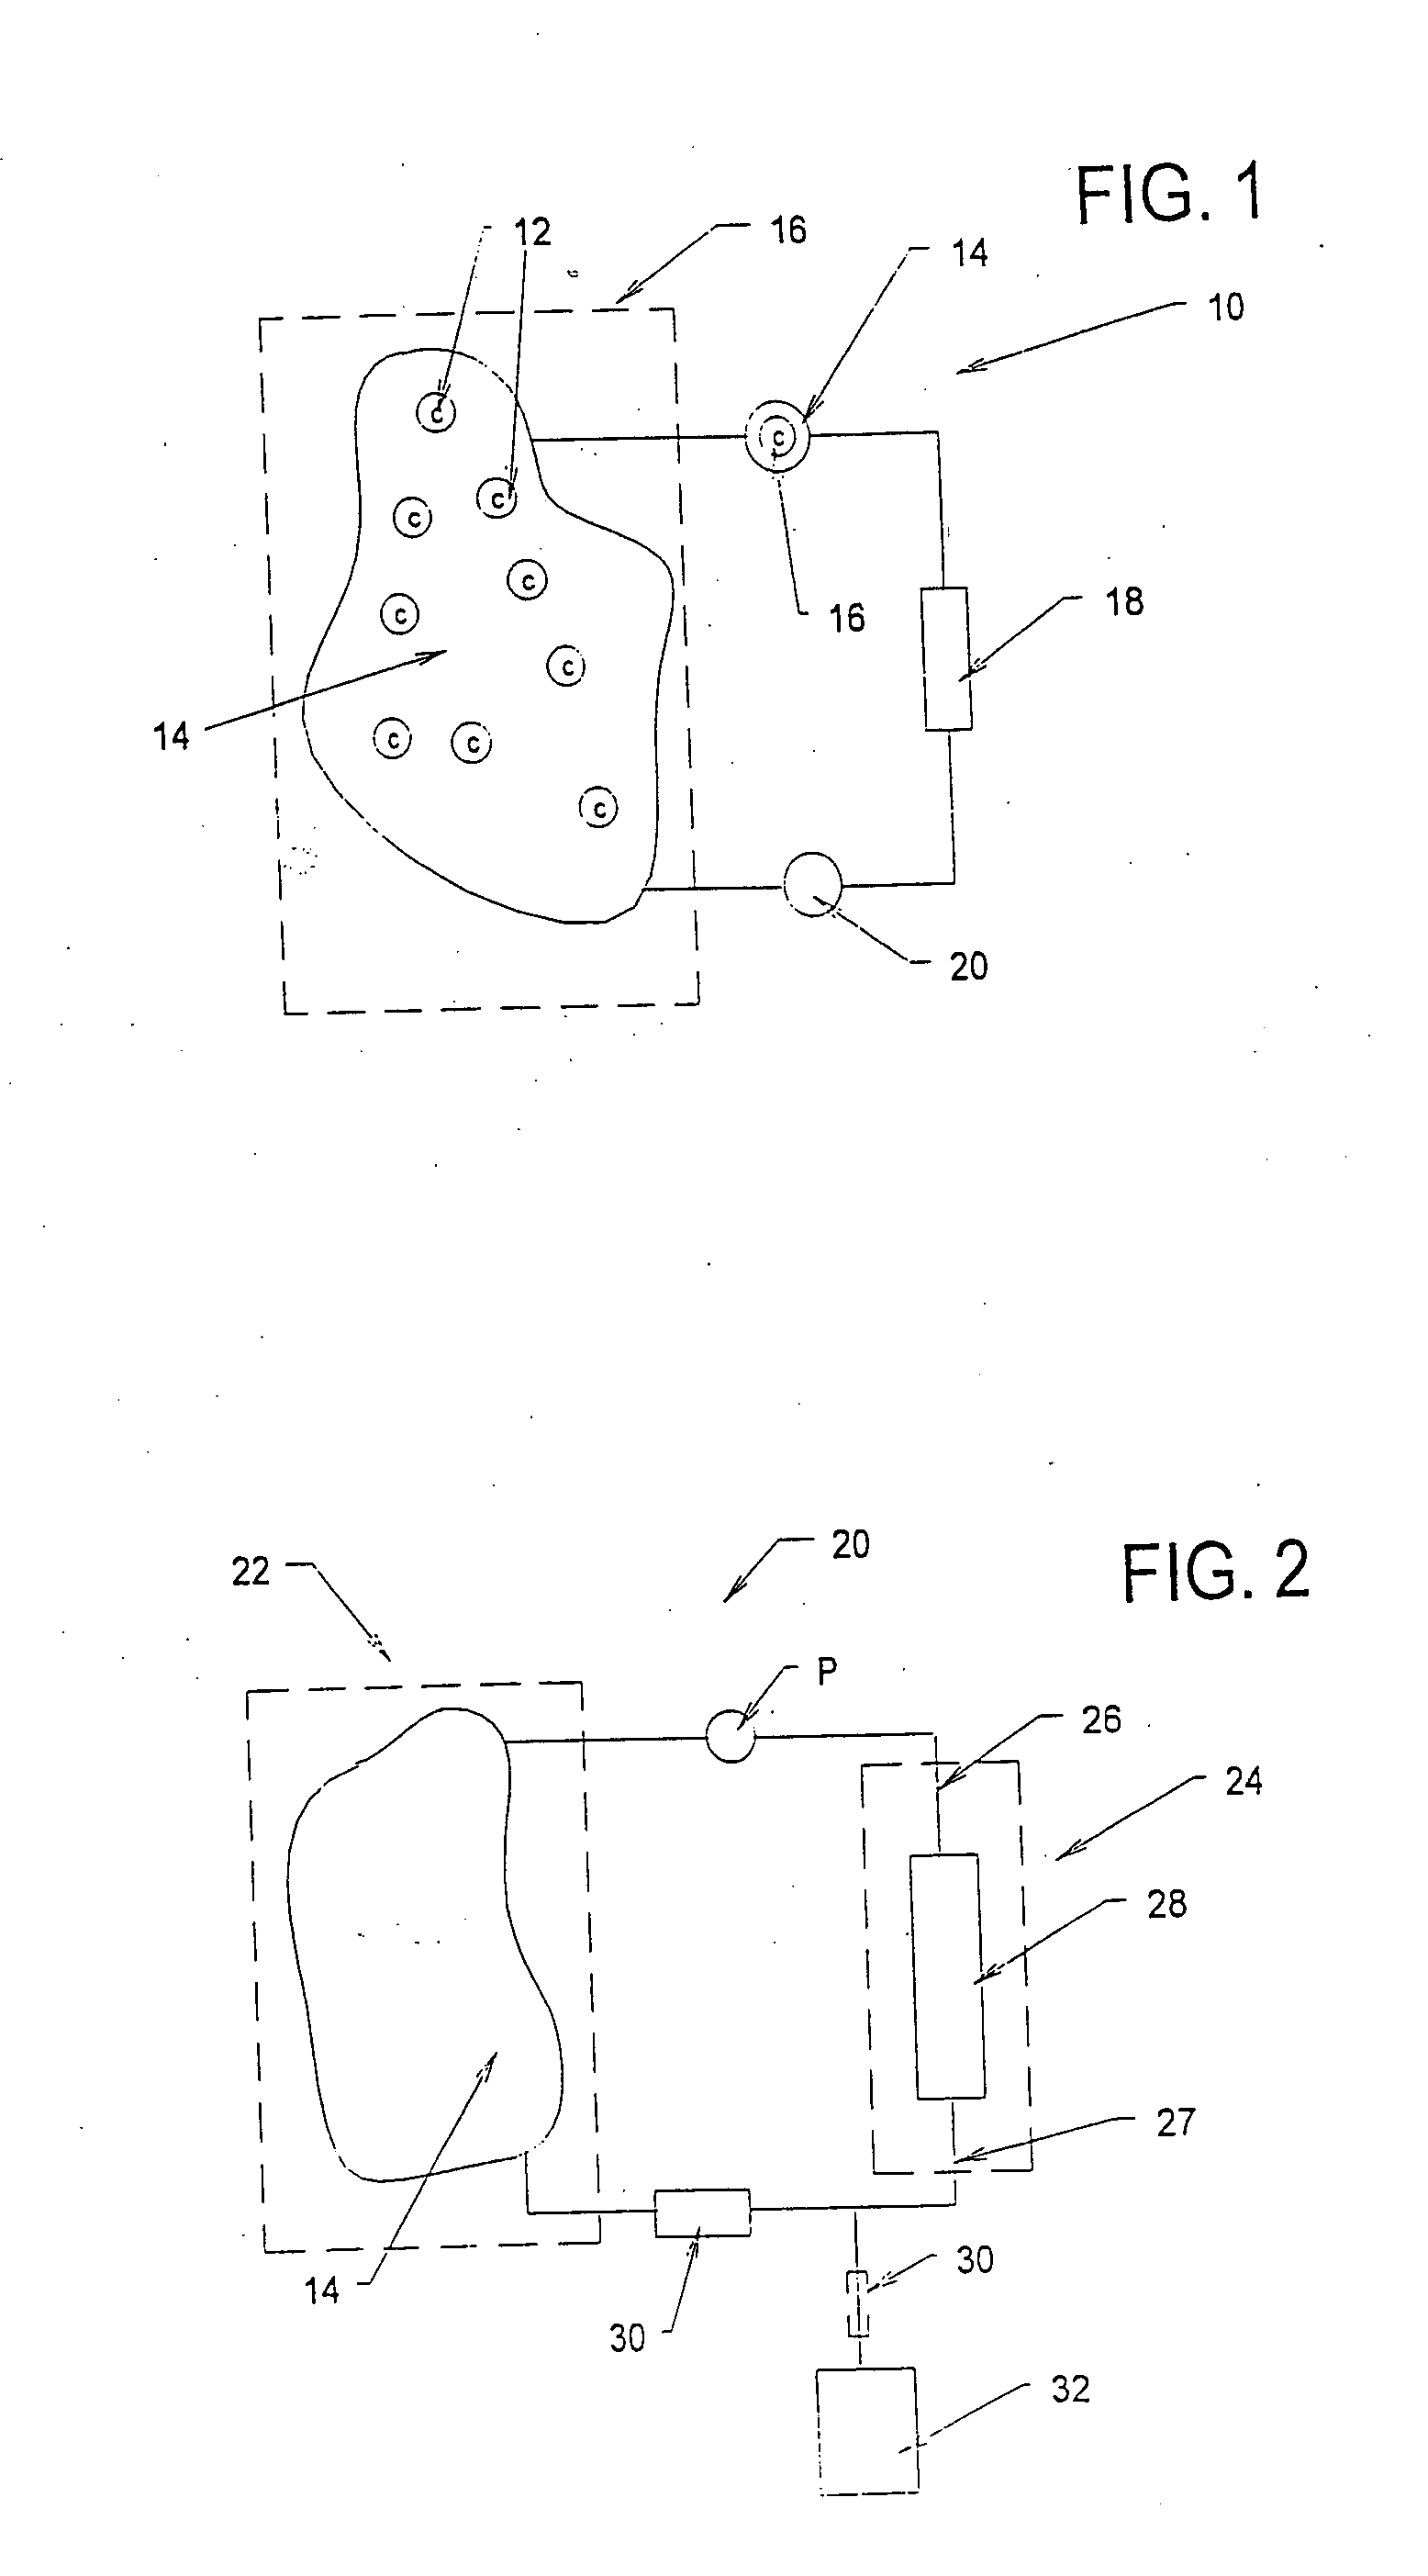 Biocompatible devices, systems, and methods for reducing levels of pro-inflammatory or anti-inflammatory stimulators or mediators in the blood